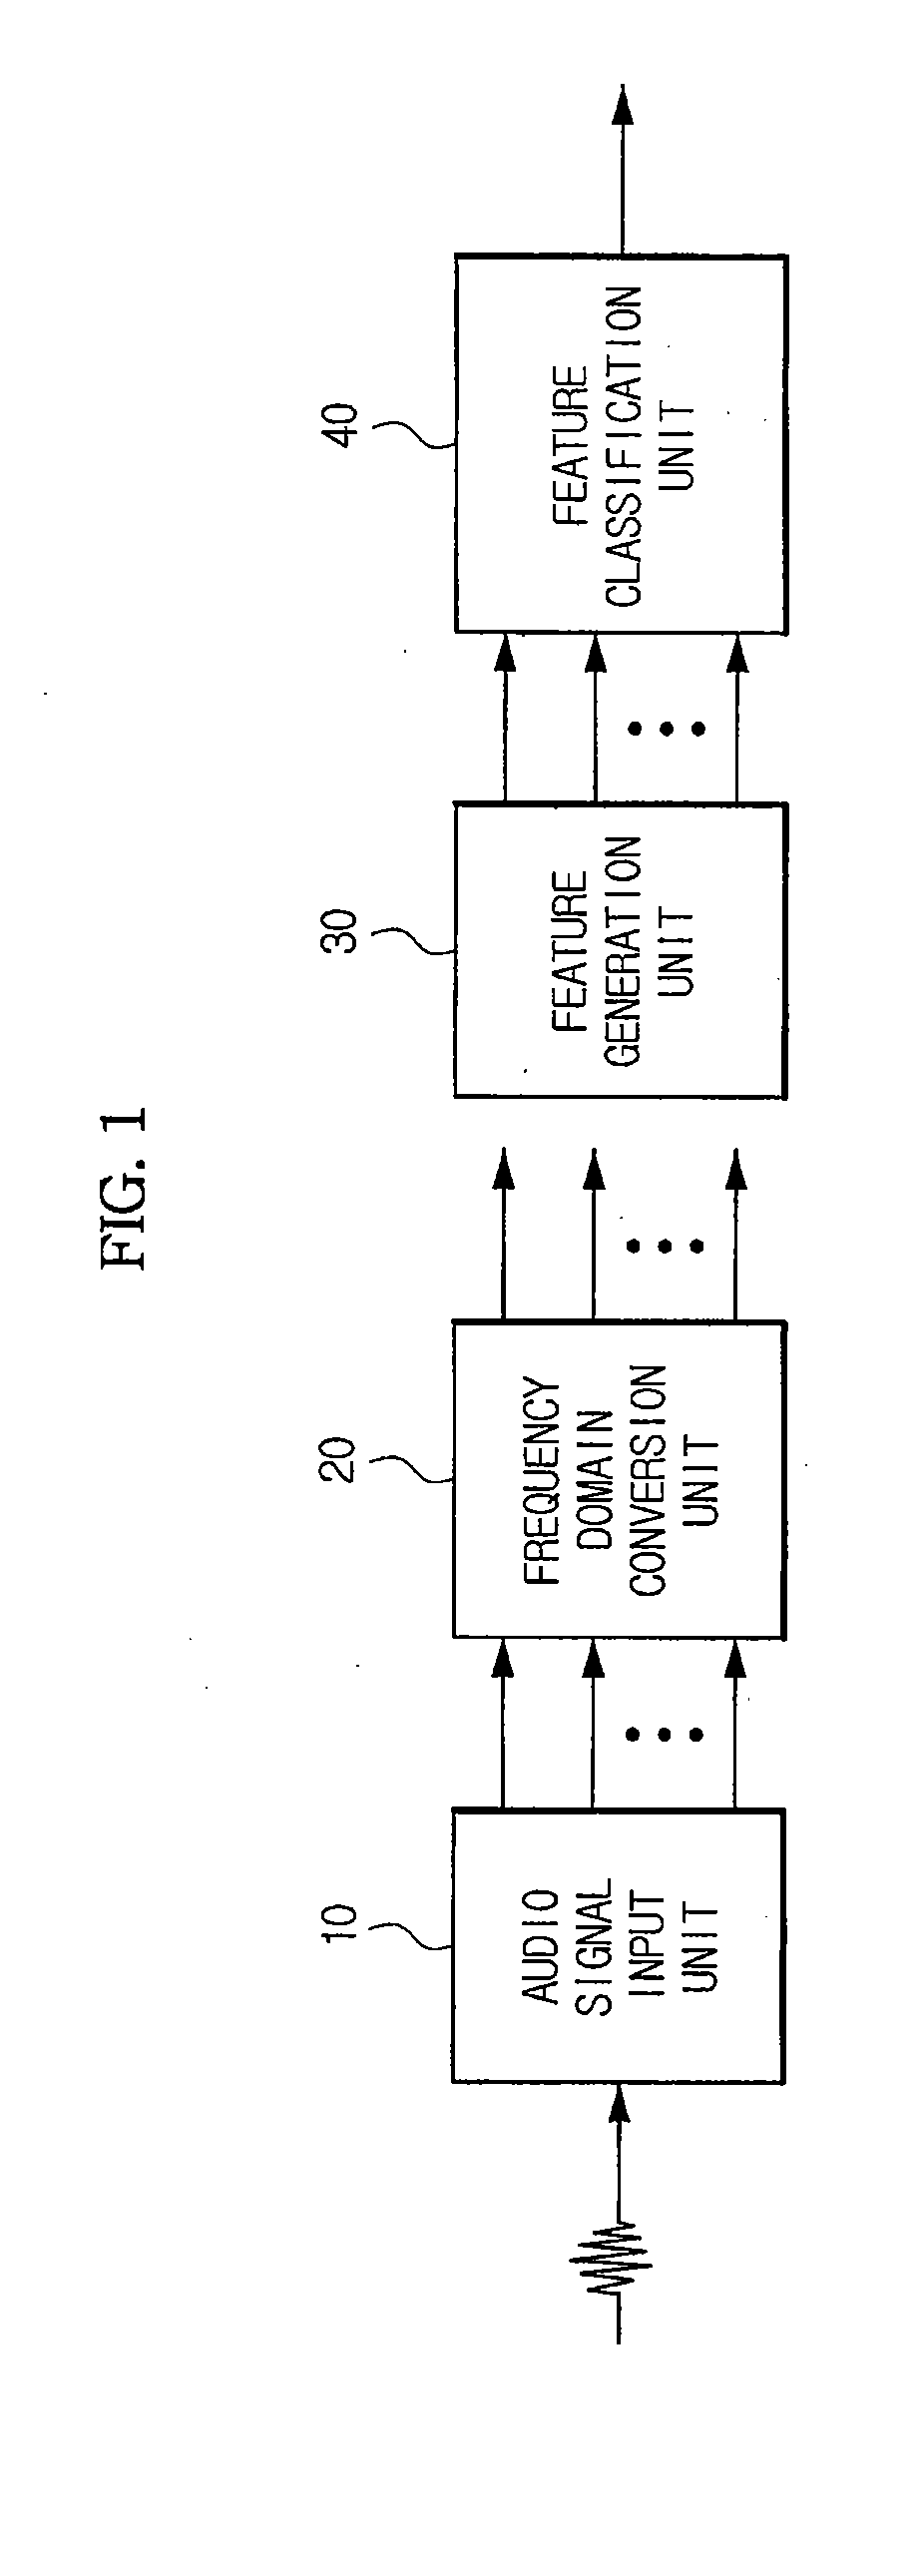 Self-fault detection system and method for microphone array and audio-based device